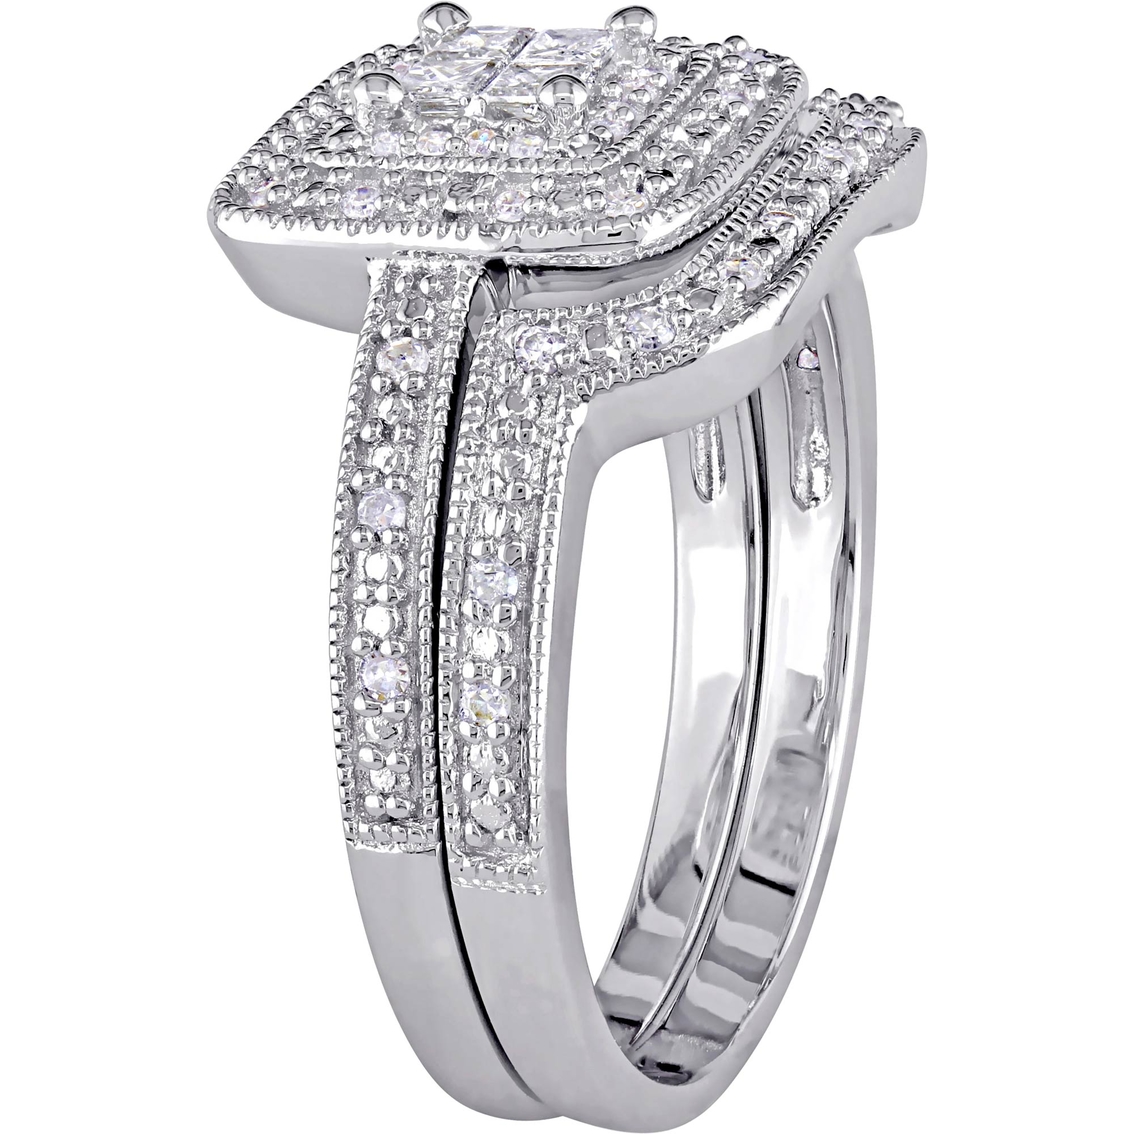 Diamore 1/3 CTW Diamond Bridal Set in Sterling Silver - Image 2 of 4